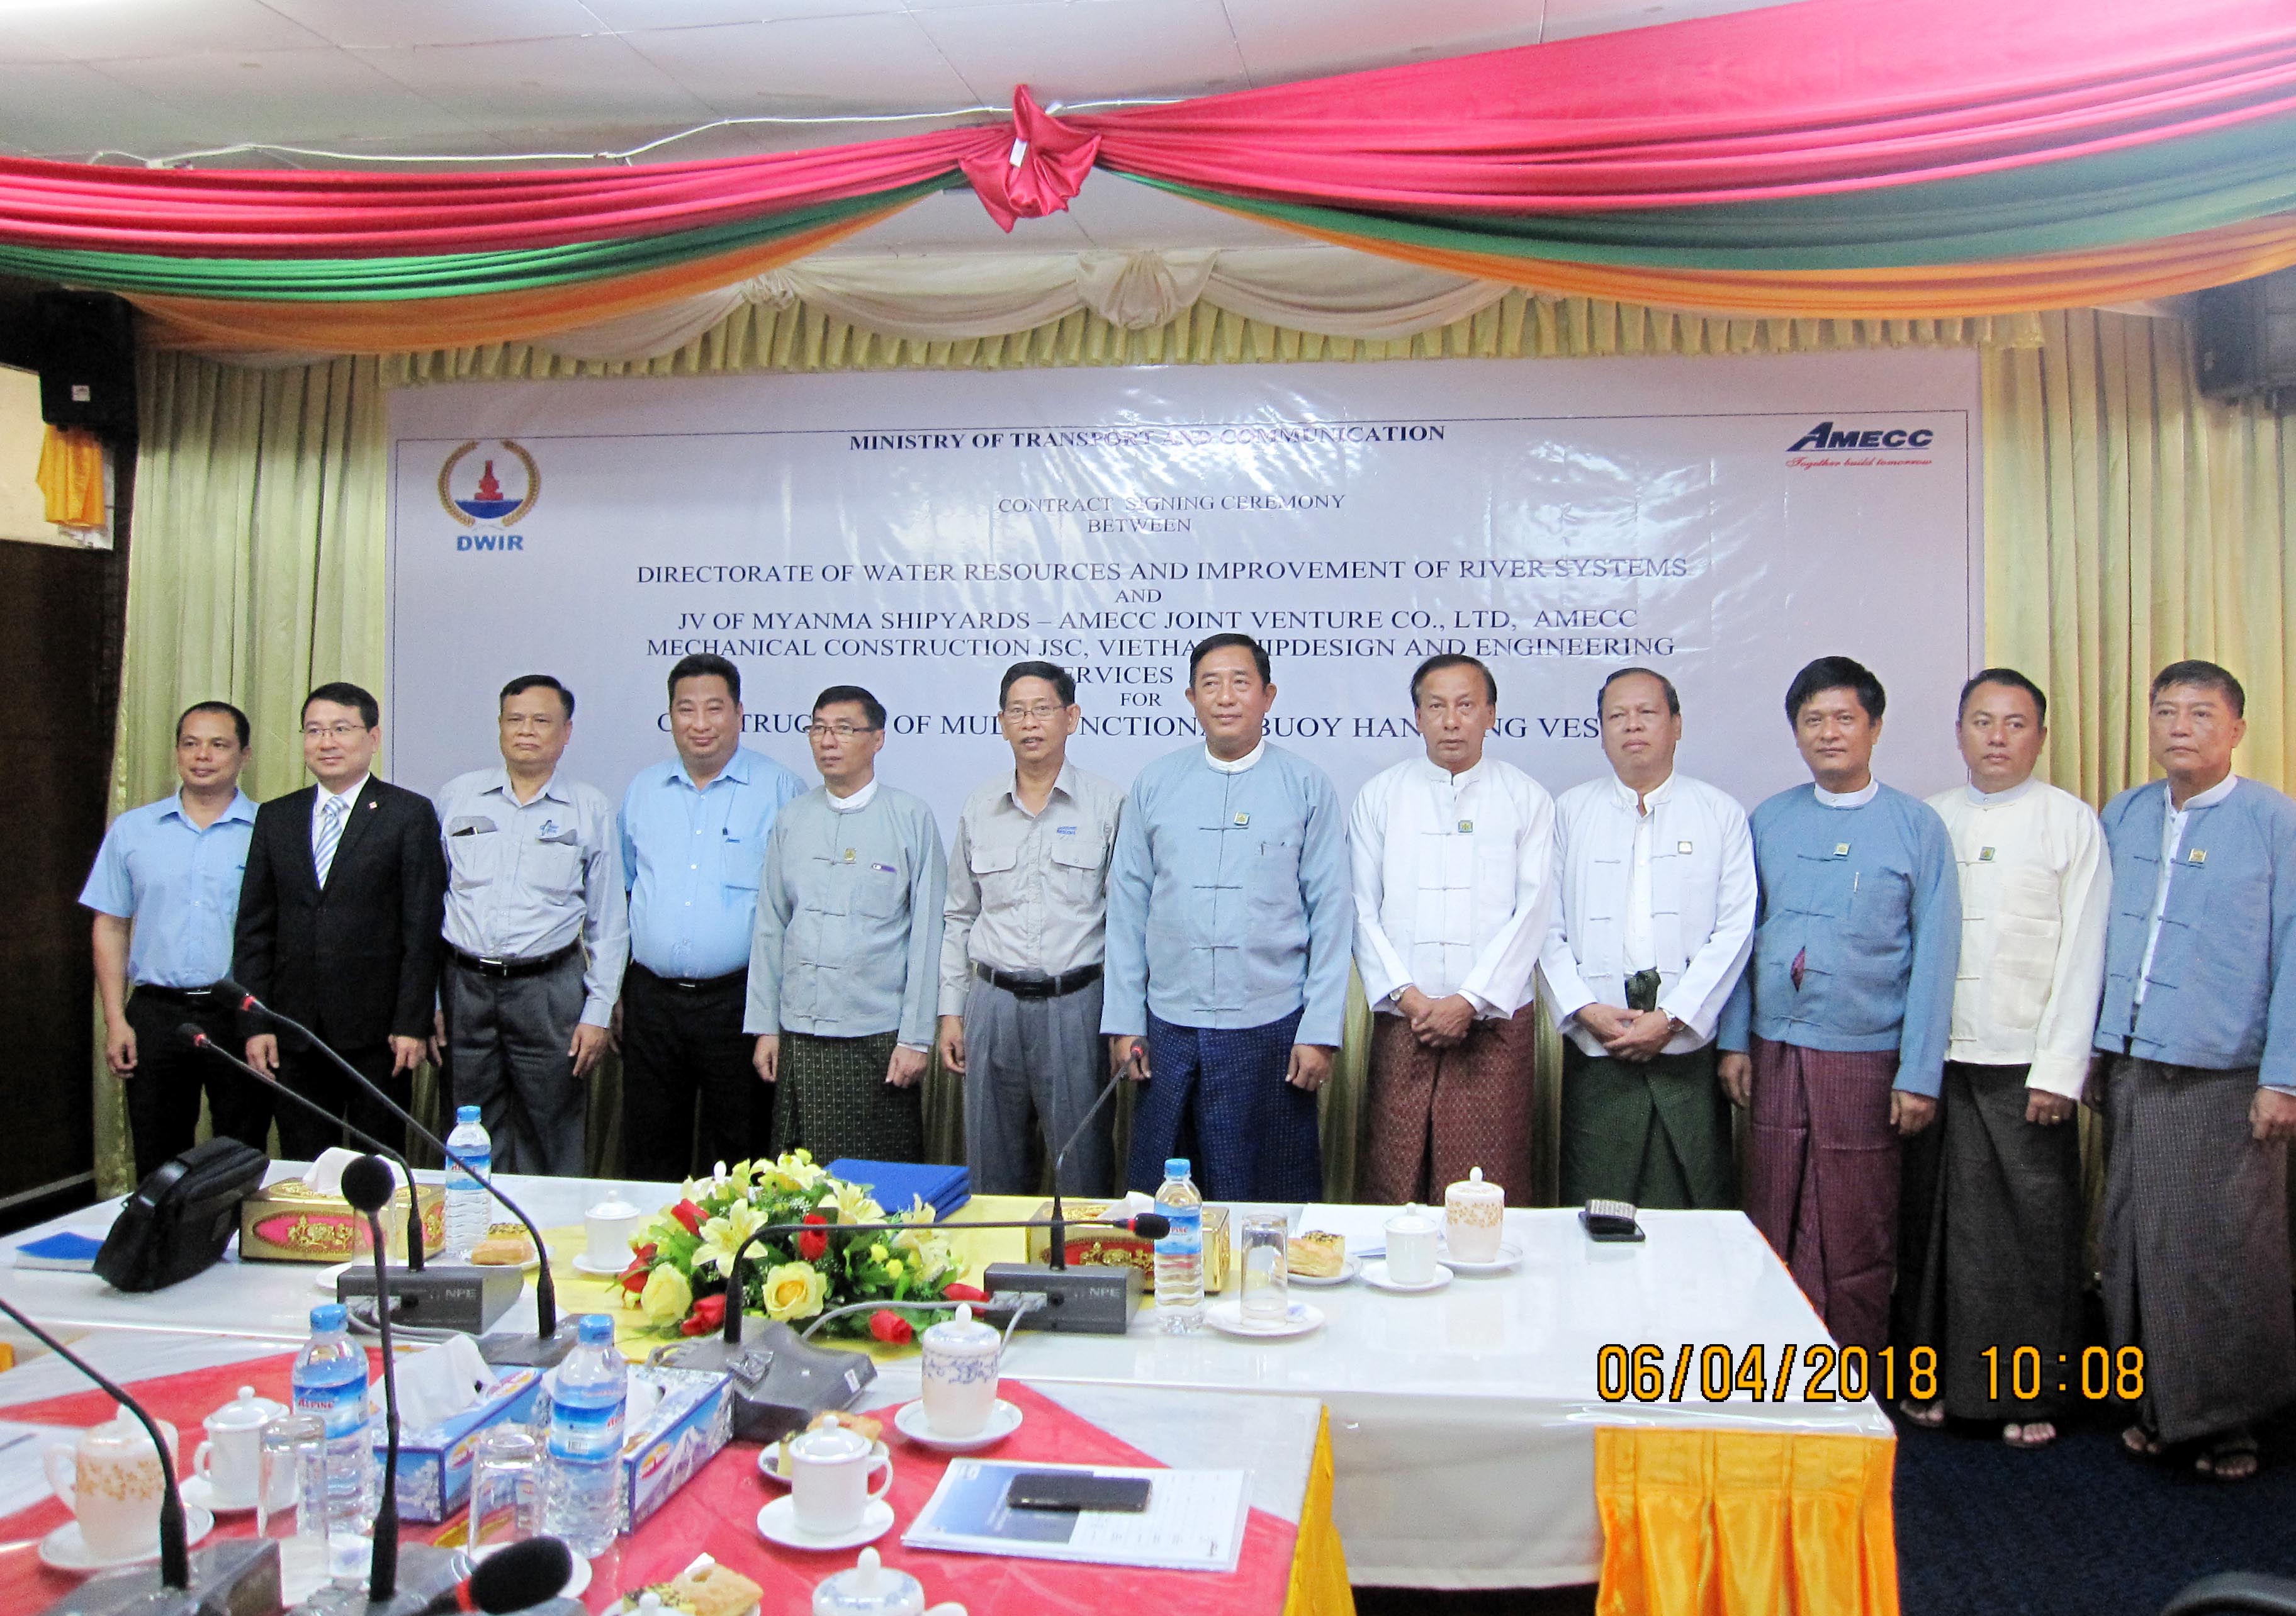 CONTRACT SIGNING CEREMONY HELD TO CONSTRUCT THE MULTIFUNCTIONAL BUOY HANDLING VESSEL